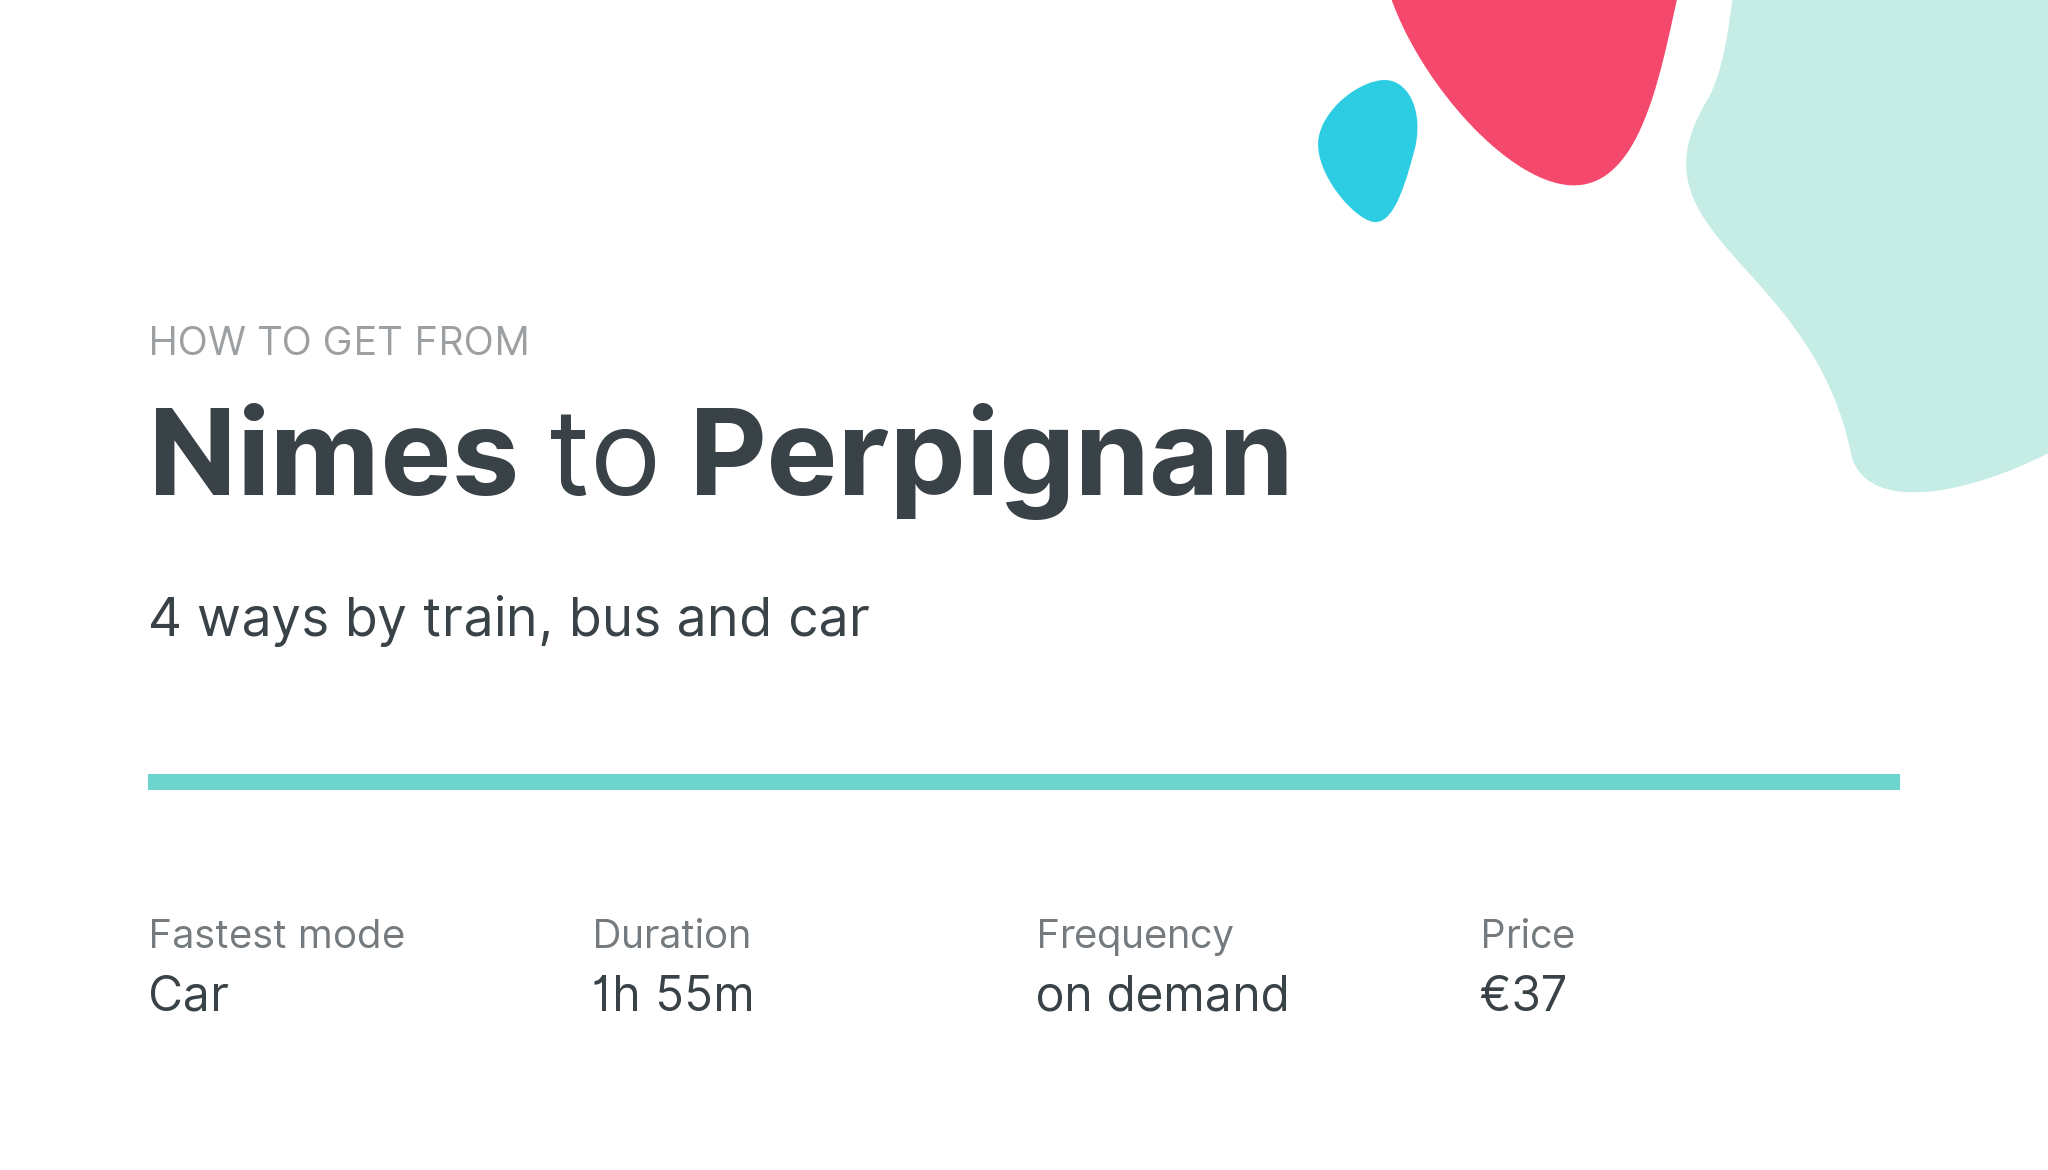 How do I get from Nimes to Perpignan